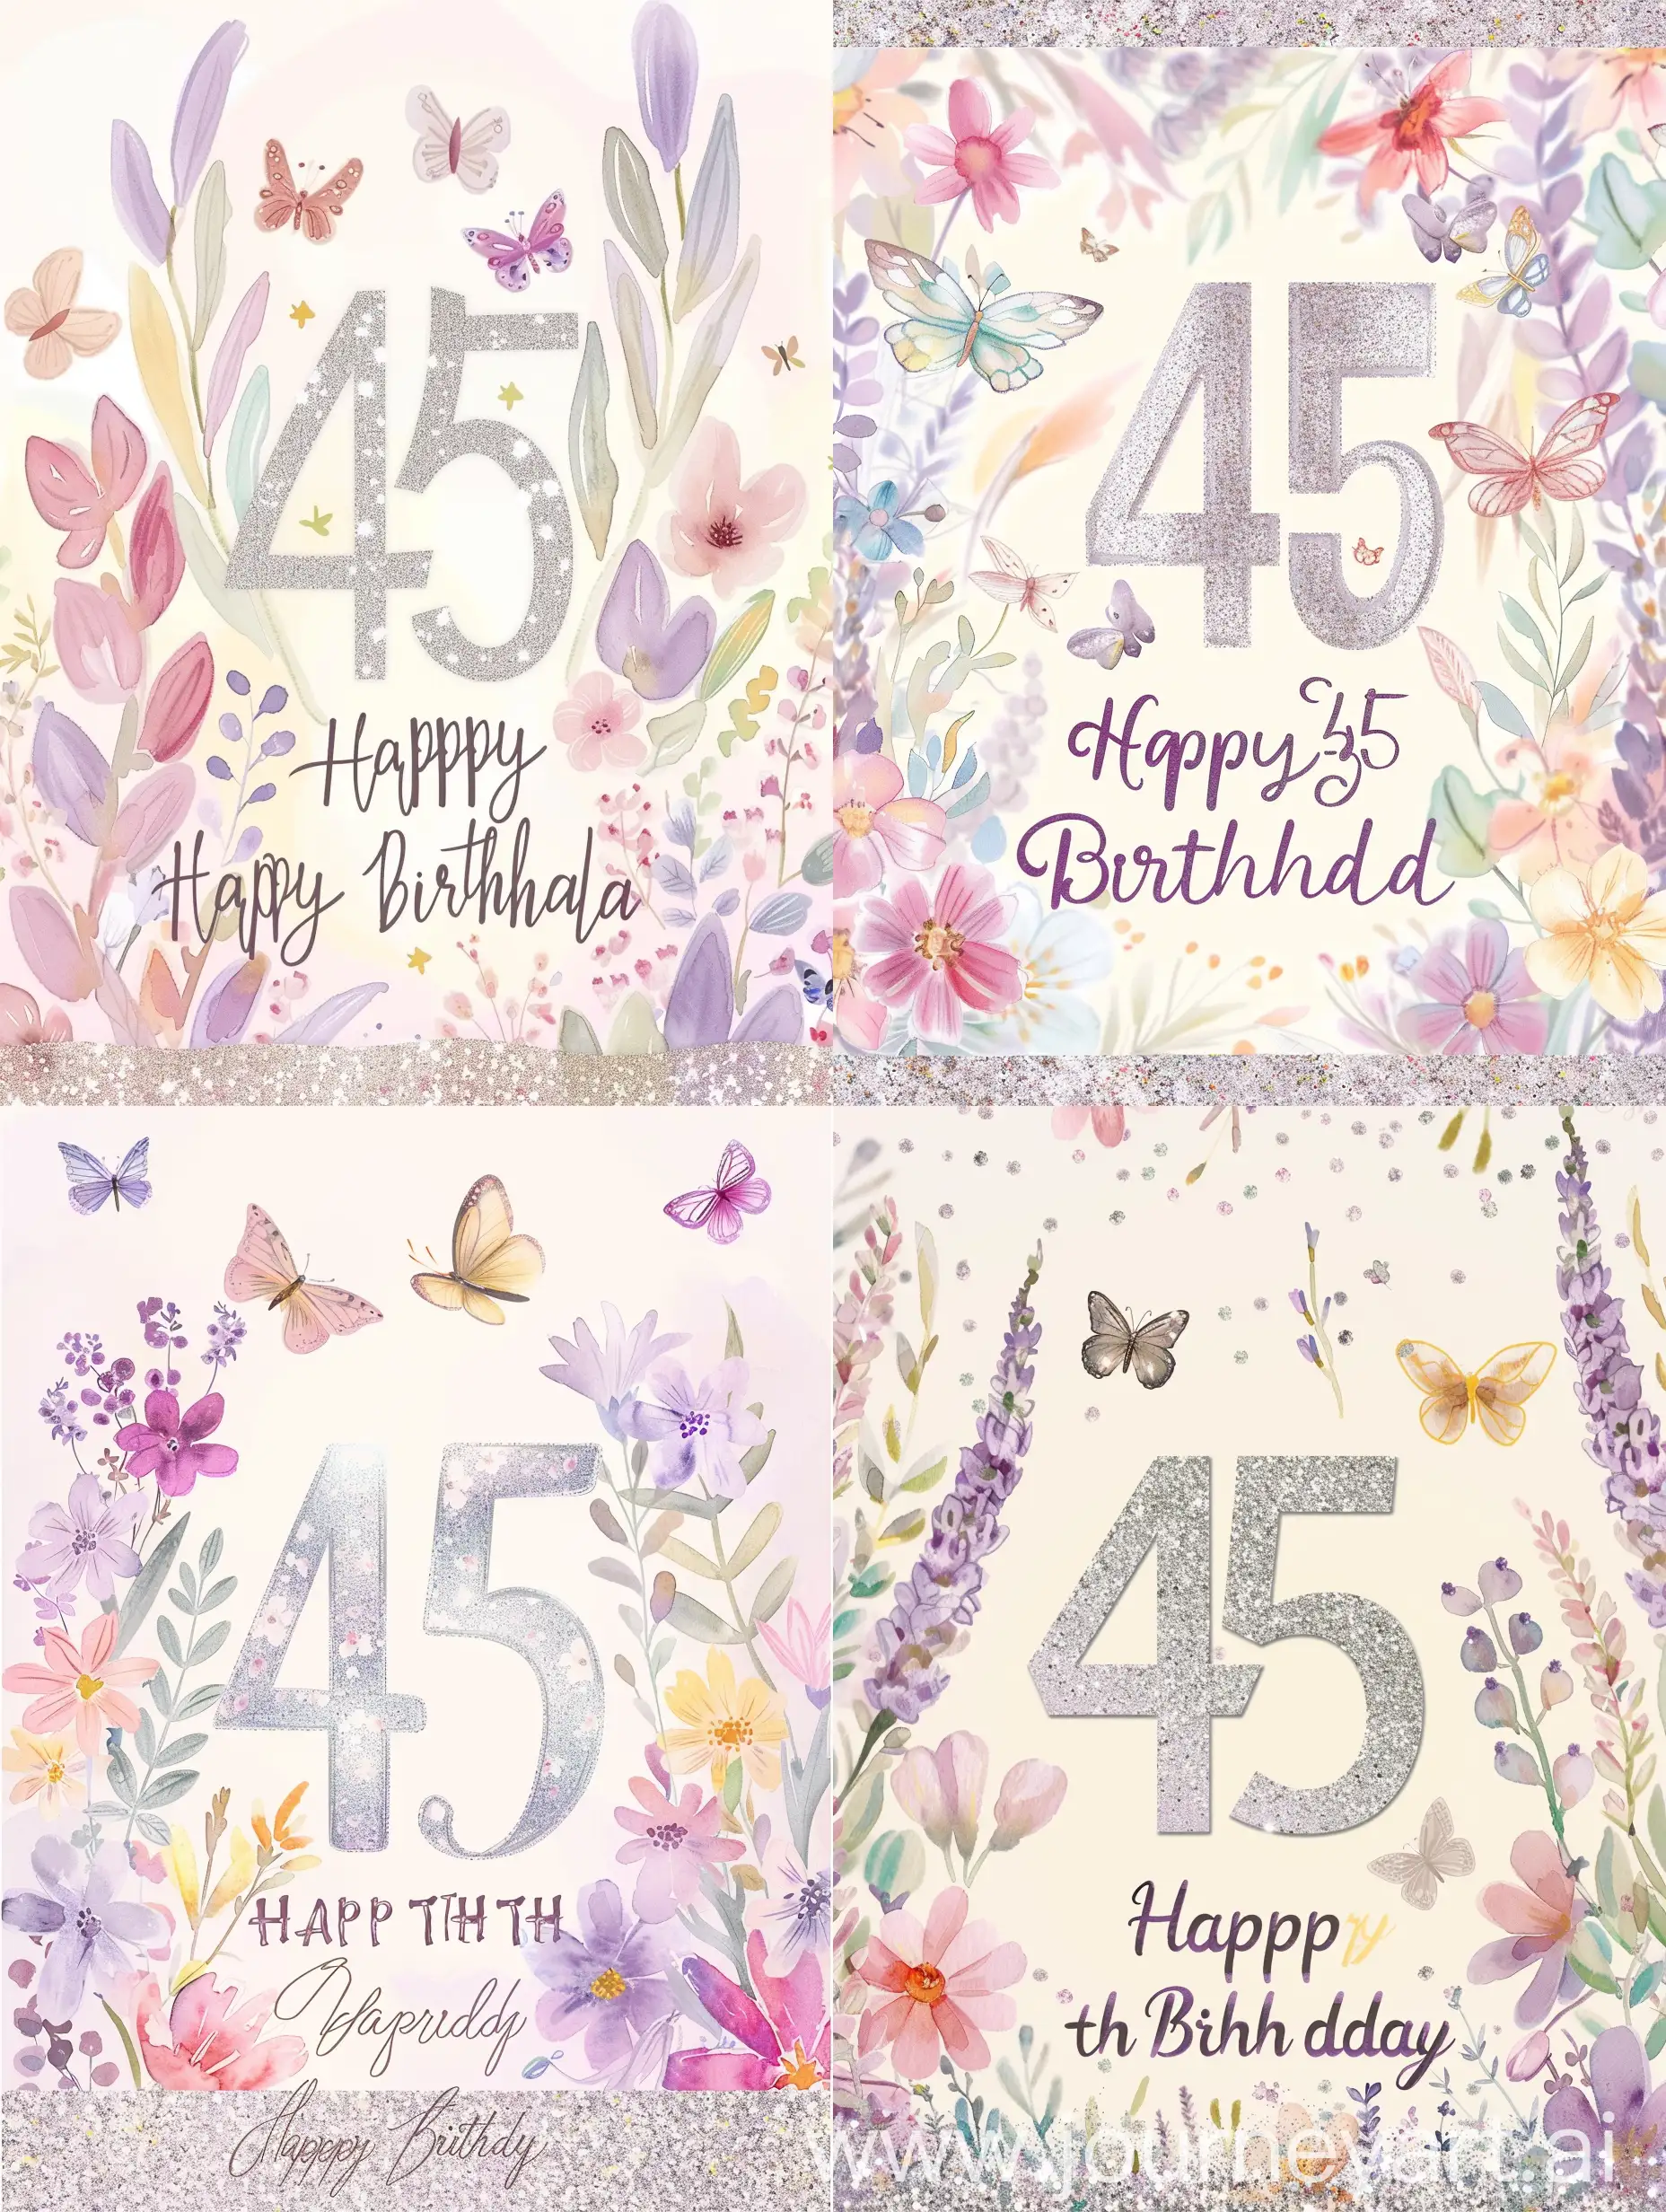 A delicate, pastel-hued greeting card adorned with a shimmering, silver-foil number "45" at its center, surrounded by a burst of gentle watercolor florals in shades of lavender, pink, and soft yellow, with fluttering butterflies and a graceful script below that reads "Happy 45th Birthday," all framed by a subtle glittering border that catches the light with every turn.